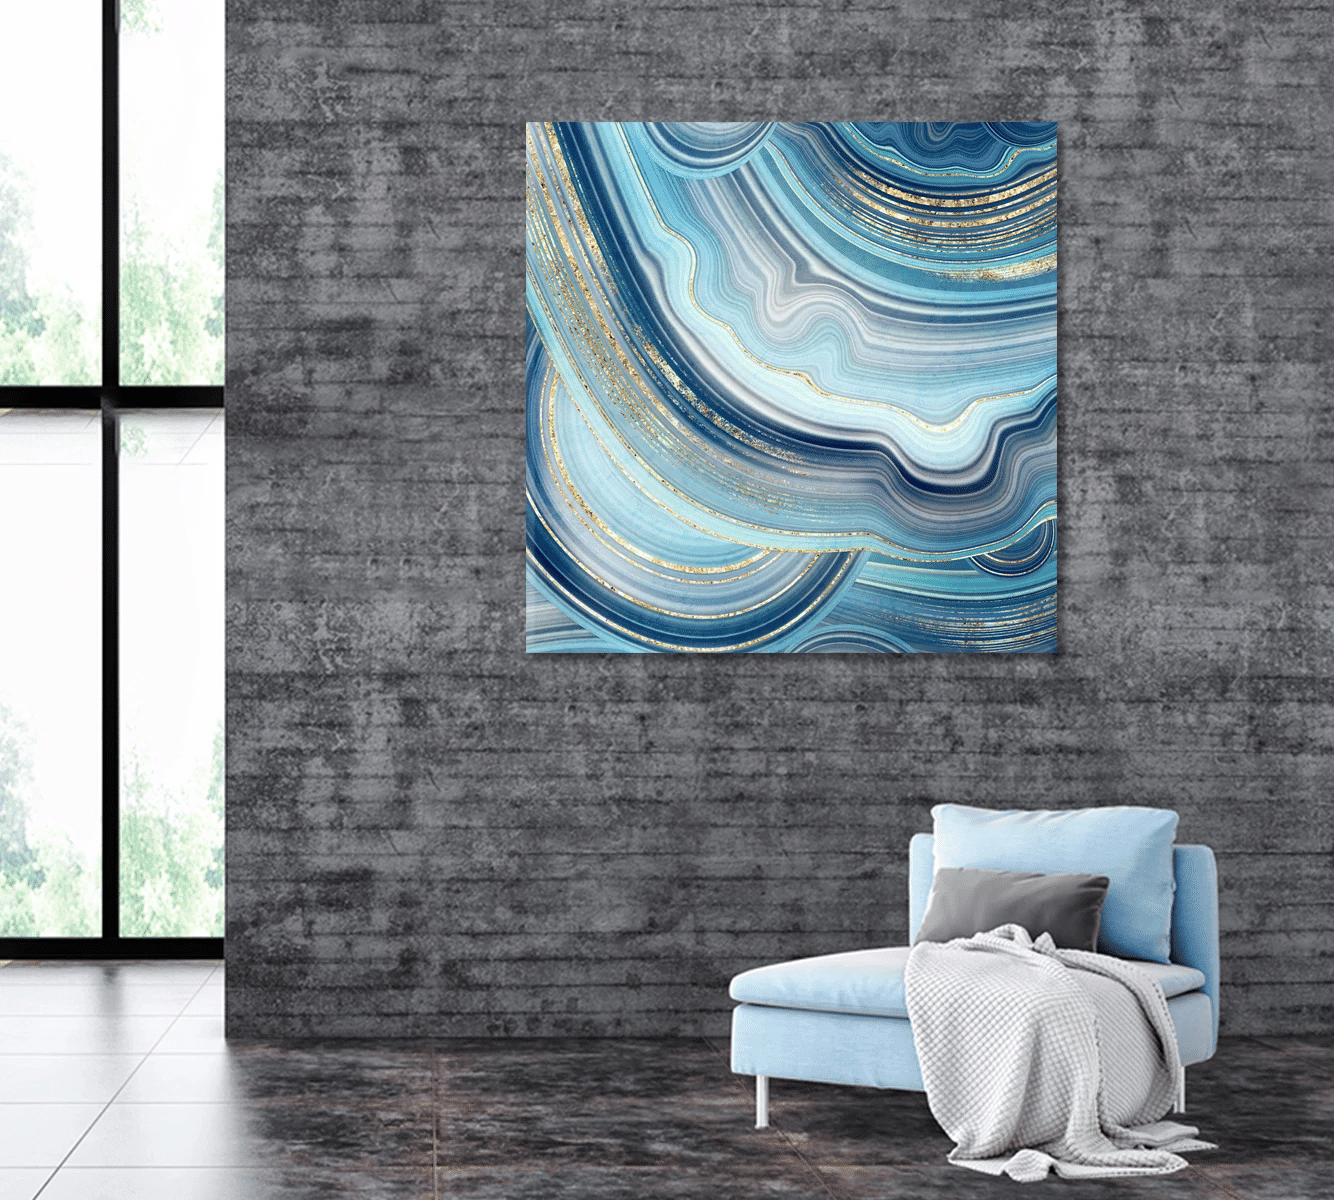 Abstract Blue Agate with Gold Veins Canvas Wall Art Decor